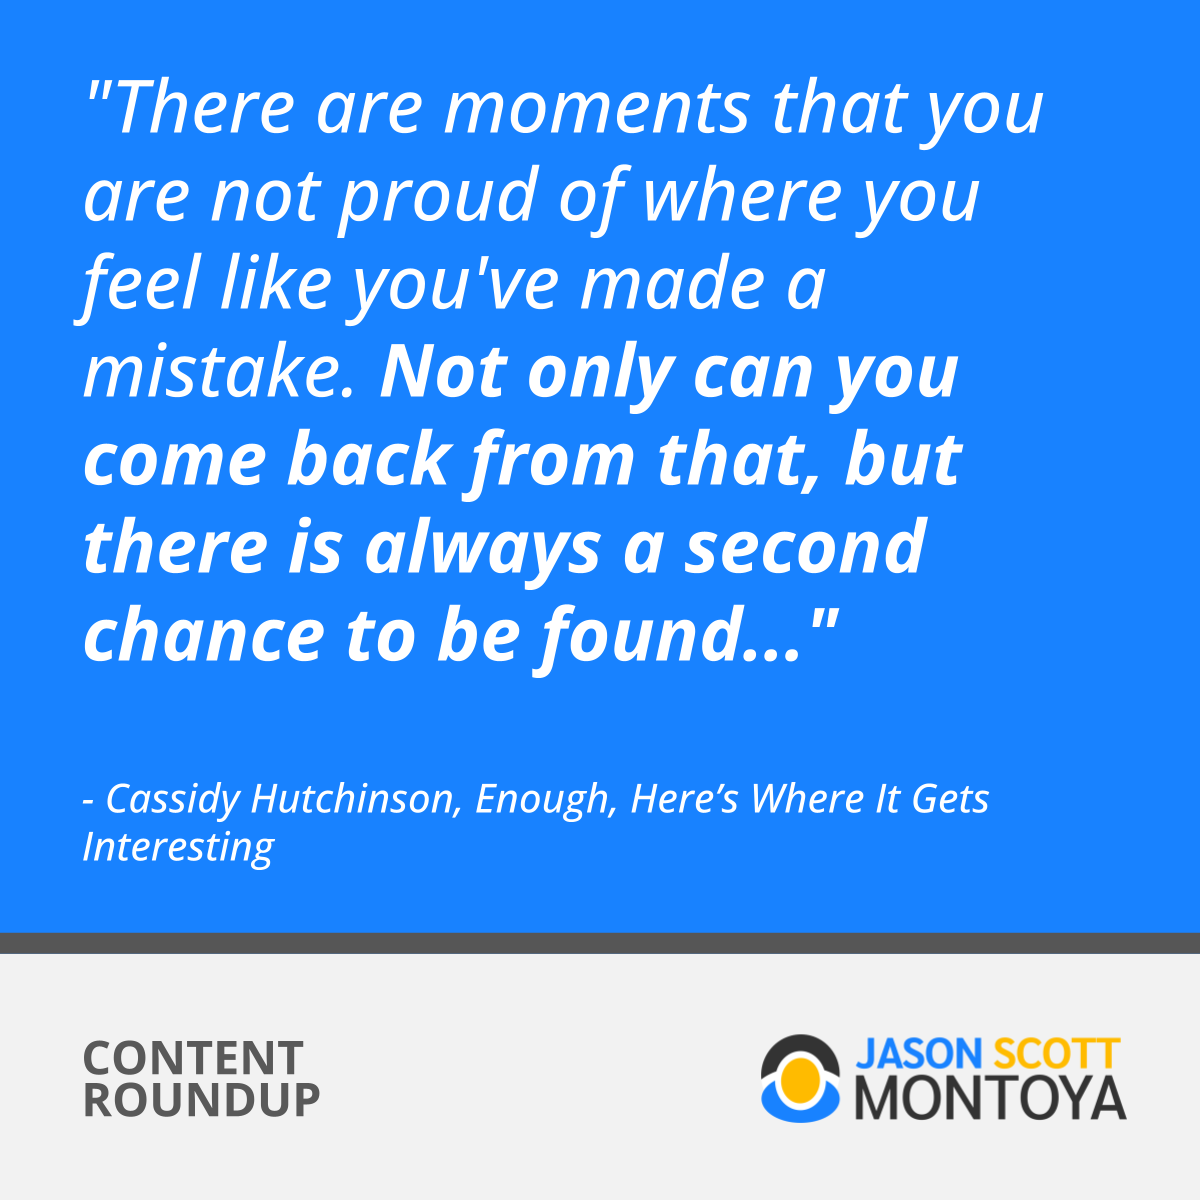 "There are moments that you are not proud of where you feel like you've made a mistake. Not only can you come back from that, but there is always a second chance to be found..."  - Cassidy Hutchinson, Enough, Here’s Where It Gets Interesting